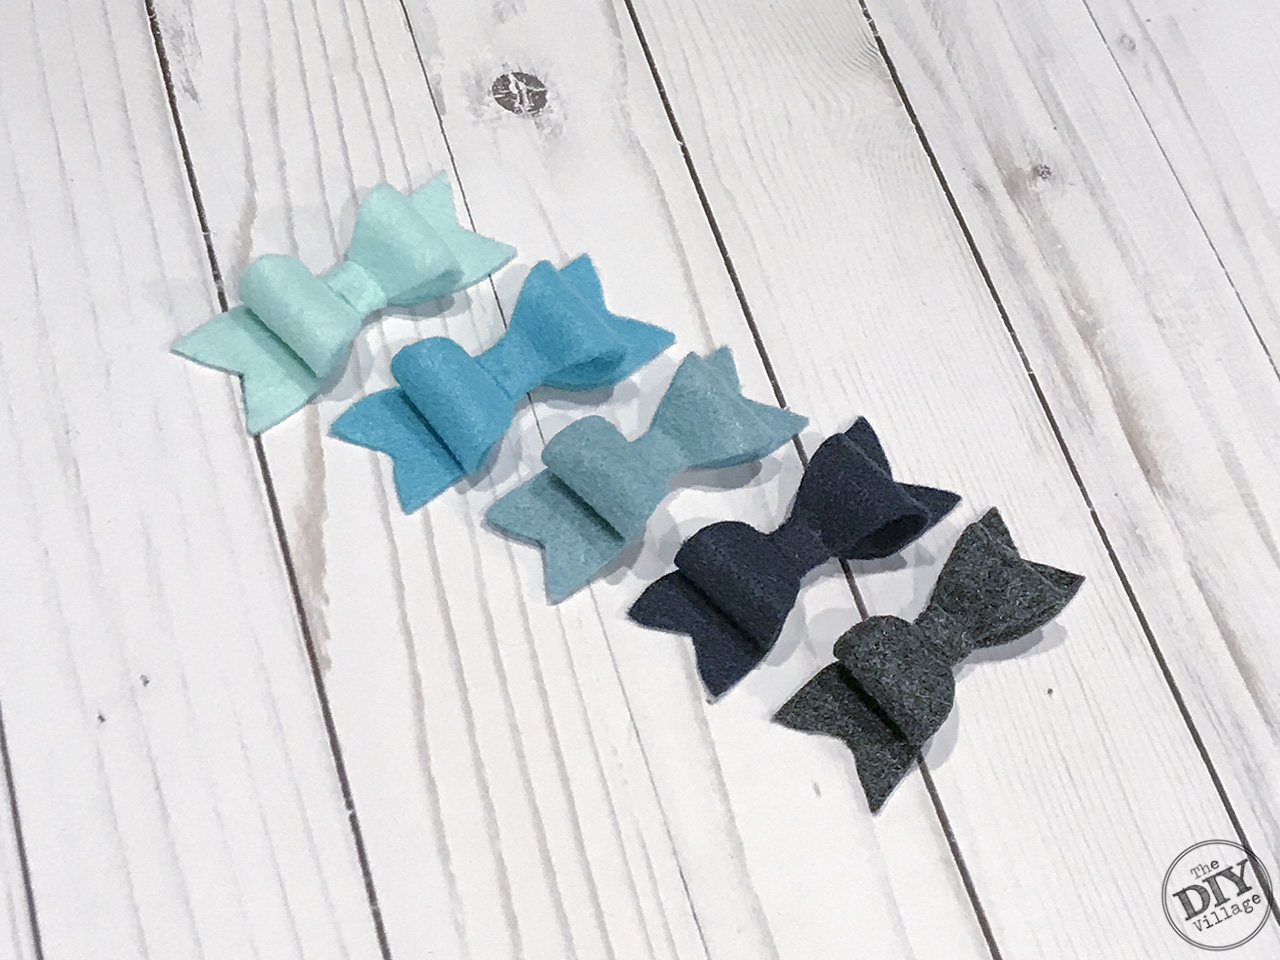 Small felt bows in shades of blues and grays